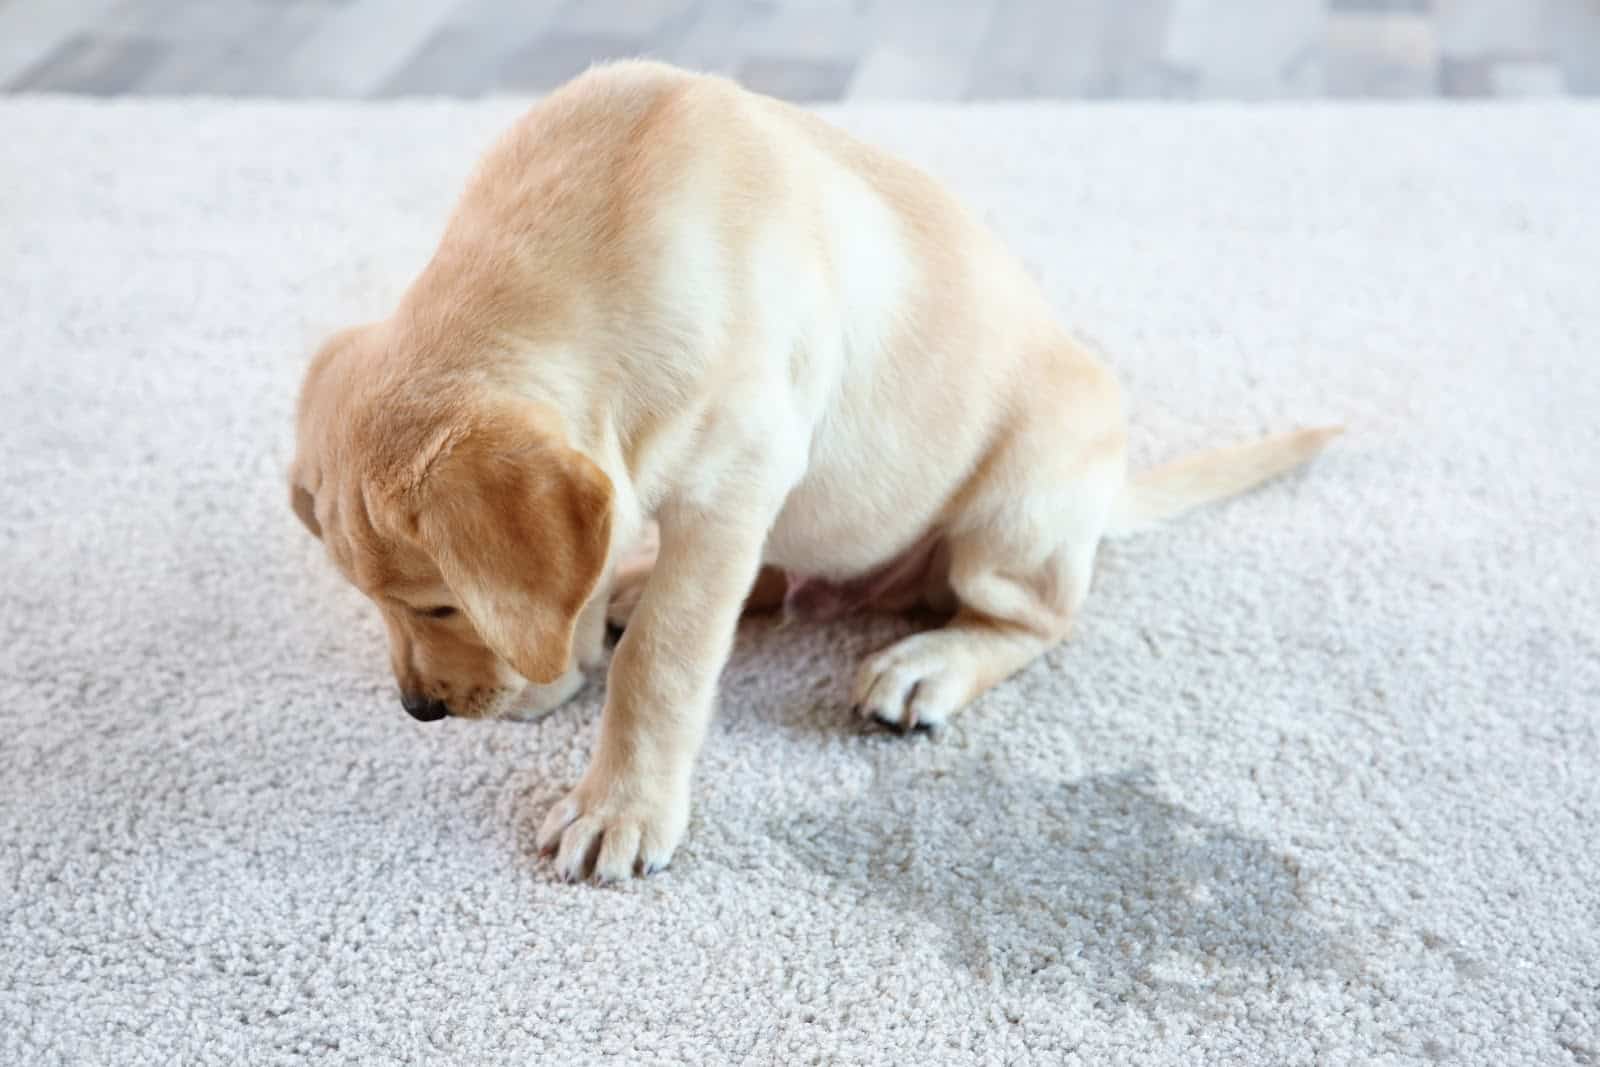 Carpet Stain Cleaning Top 4 Reasons to Replace Carpet with Hardwood Floors